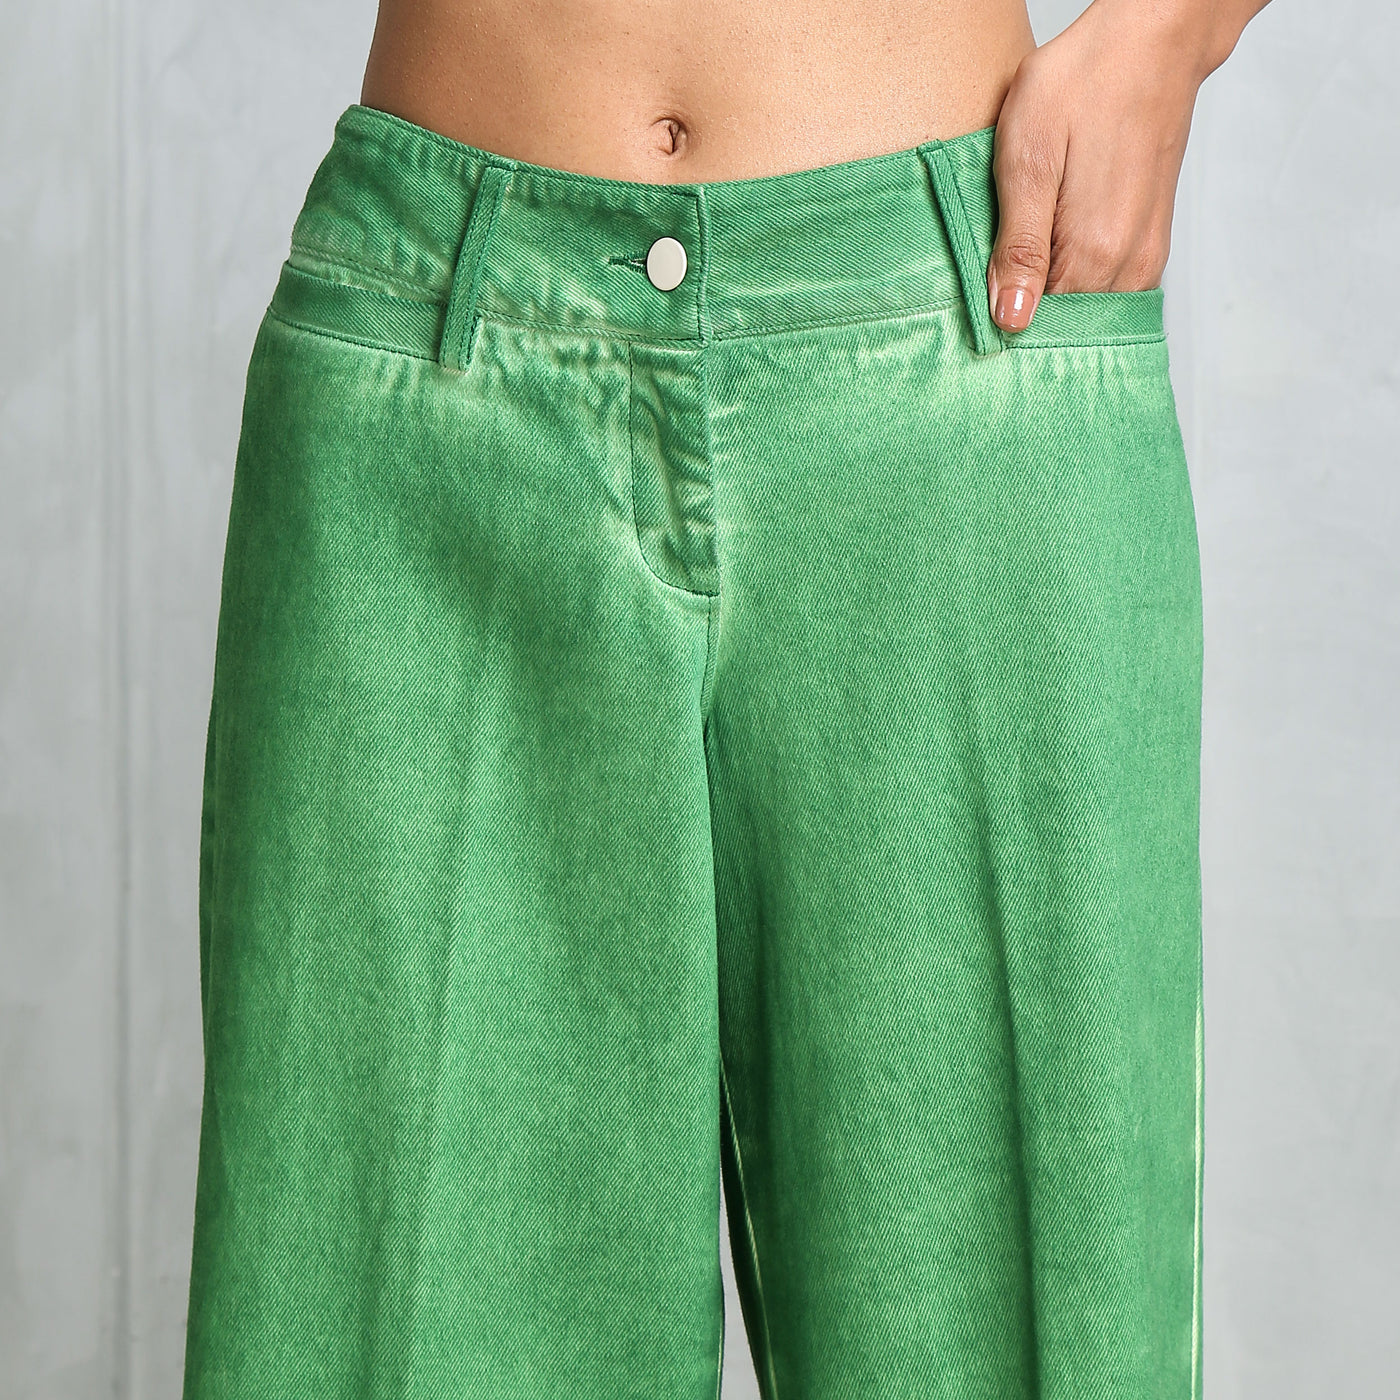 Lilith Denim Pants from Bhaane in green